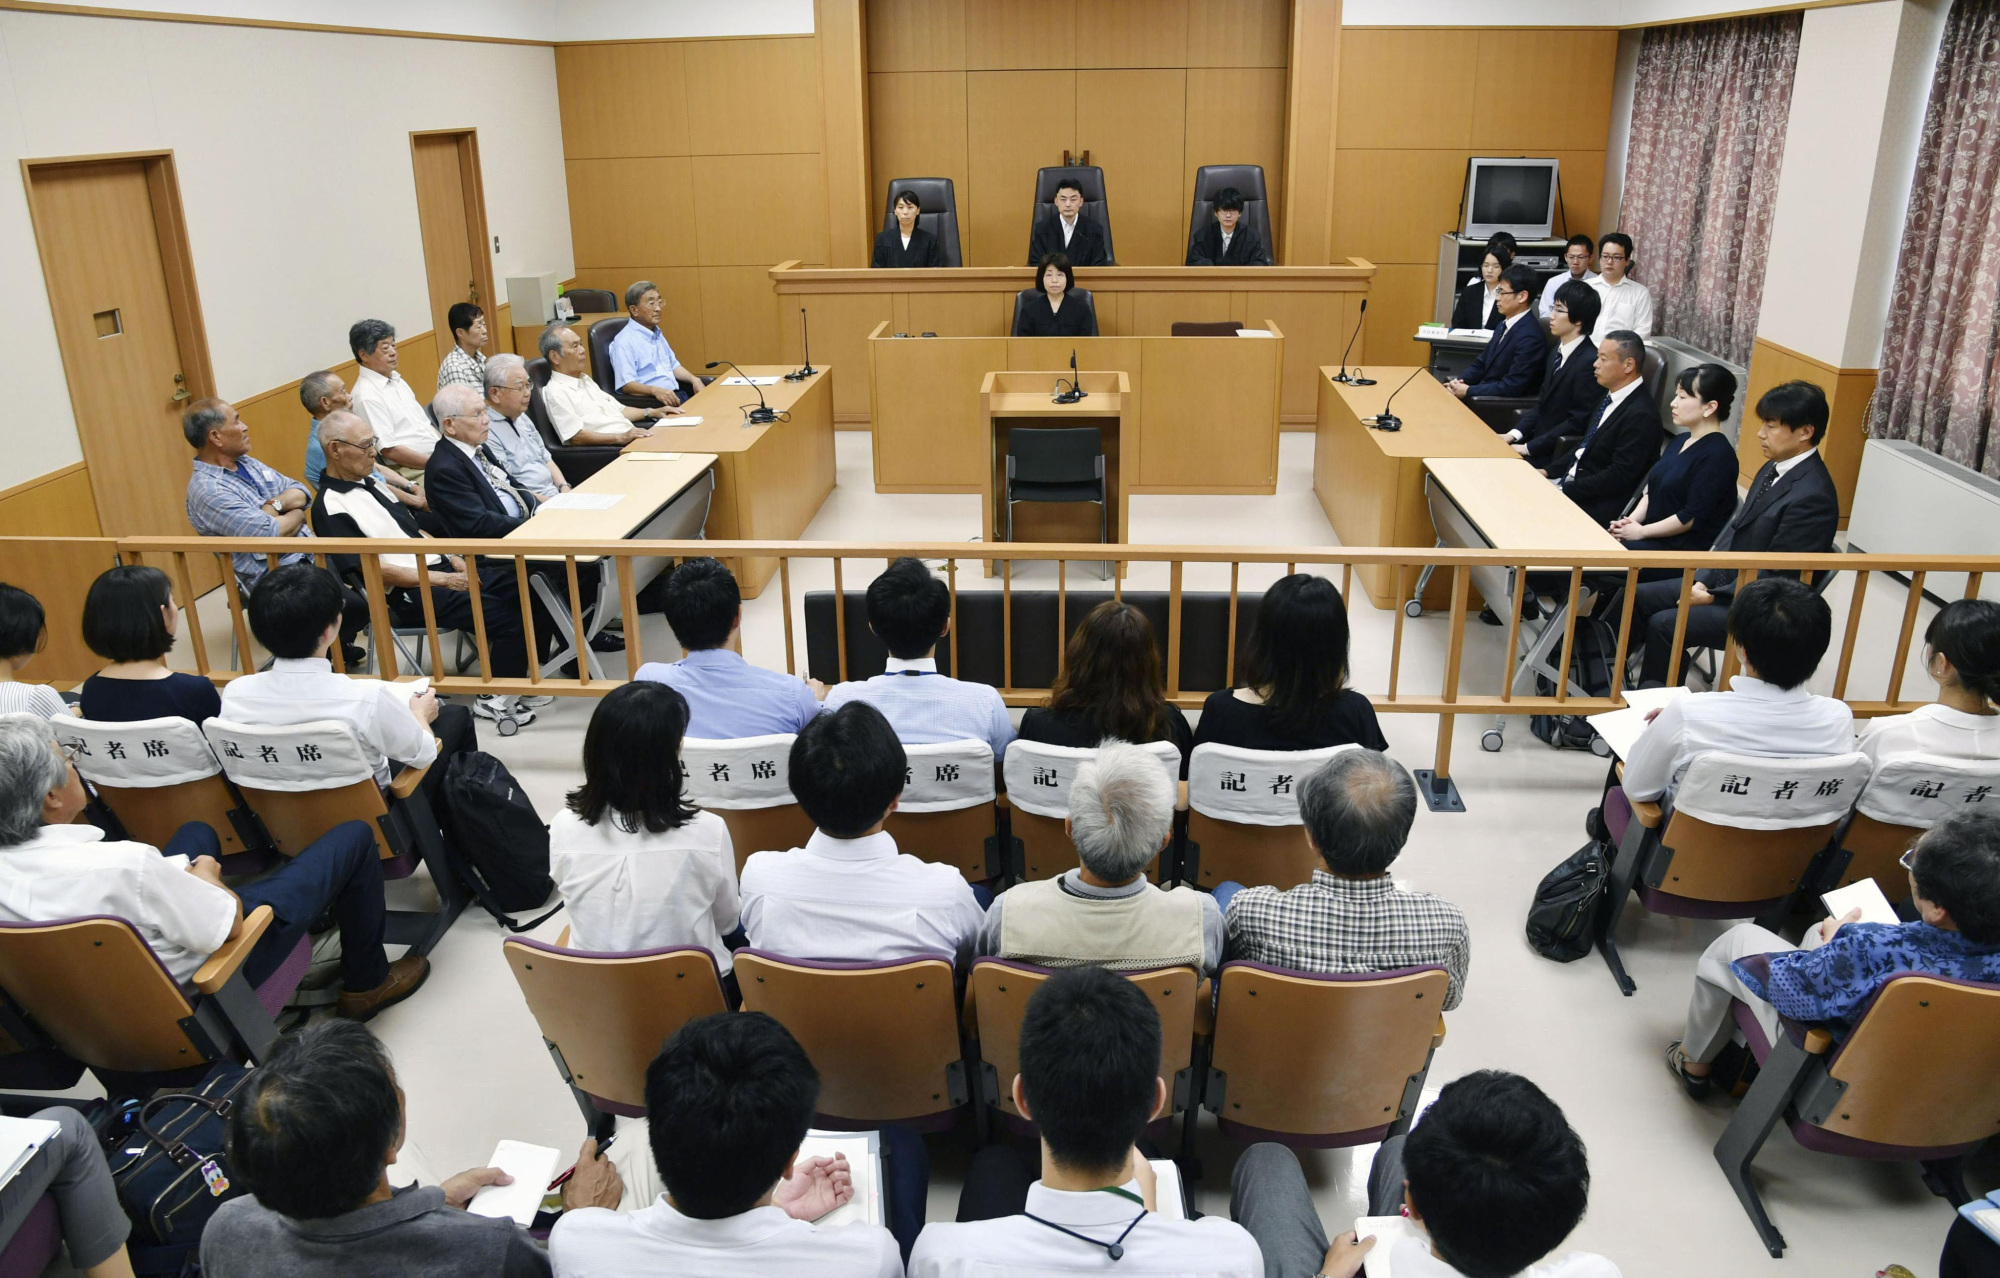 The Kochi District Court sits in session on Friday before it rejected a damages suit filed by former fishermen and their families claiming the fishermen were exposed to radiation in the 1954 U.S. hydrogen bomb tests in the Pacific. | KYODO